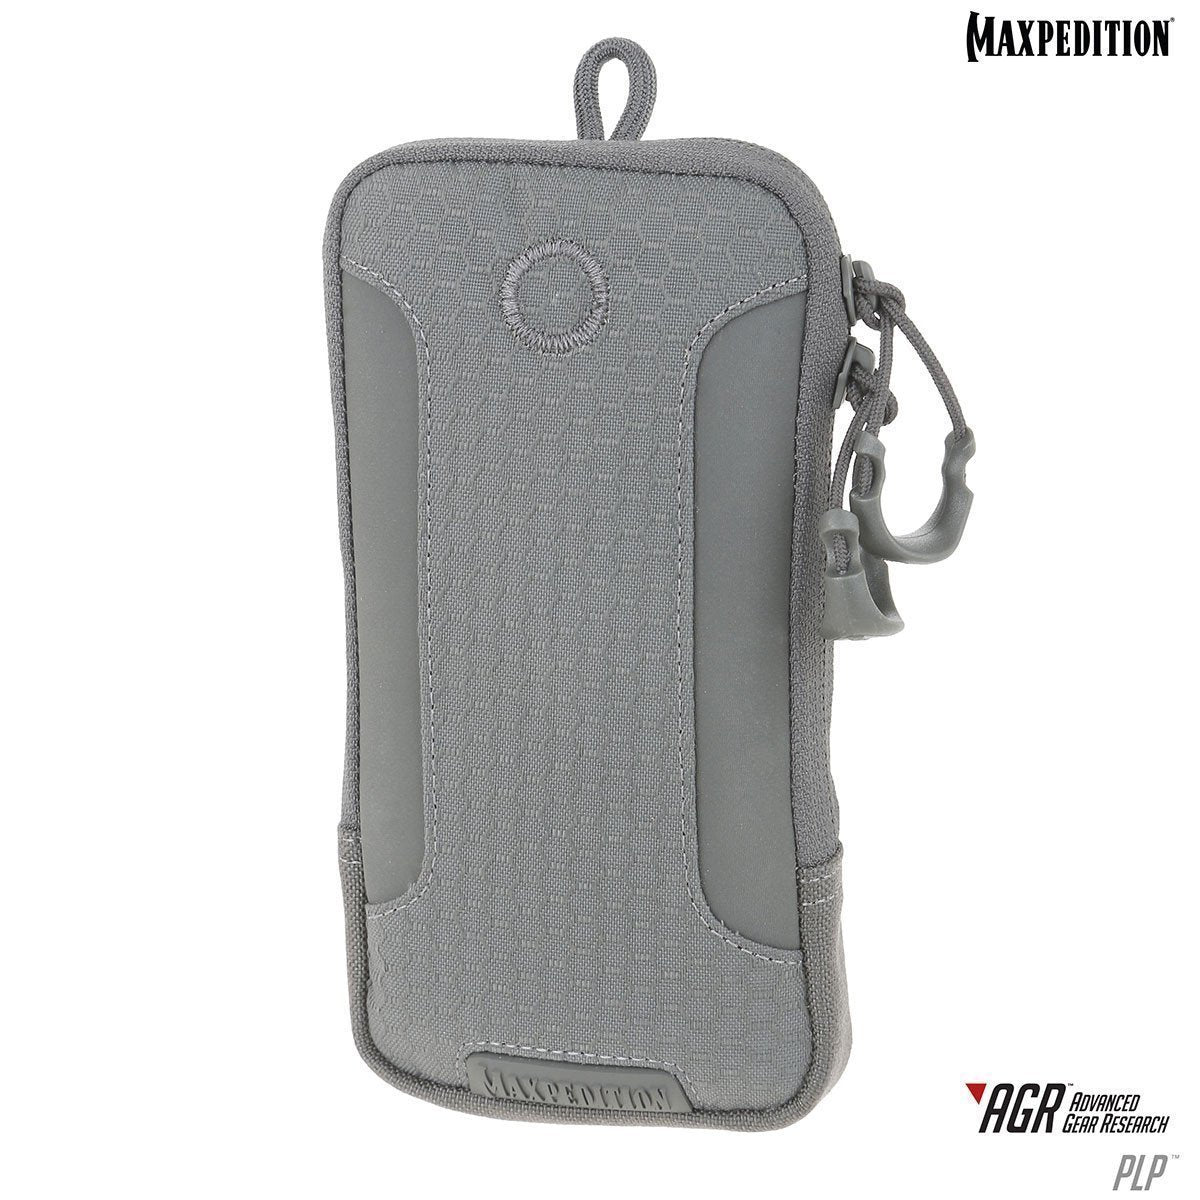 PLP™ iPhone 6/6s/7 Plus Pouch | Maxpedition  Tactical Gear